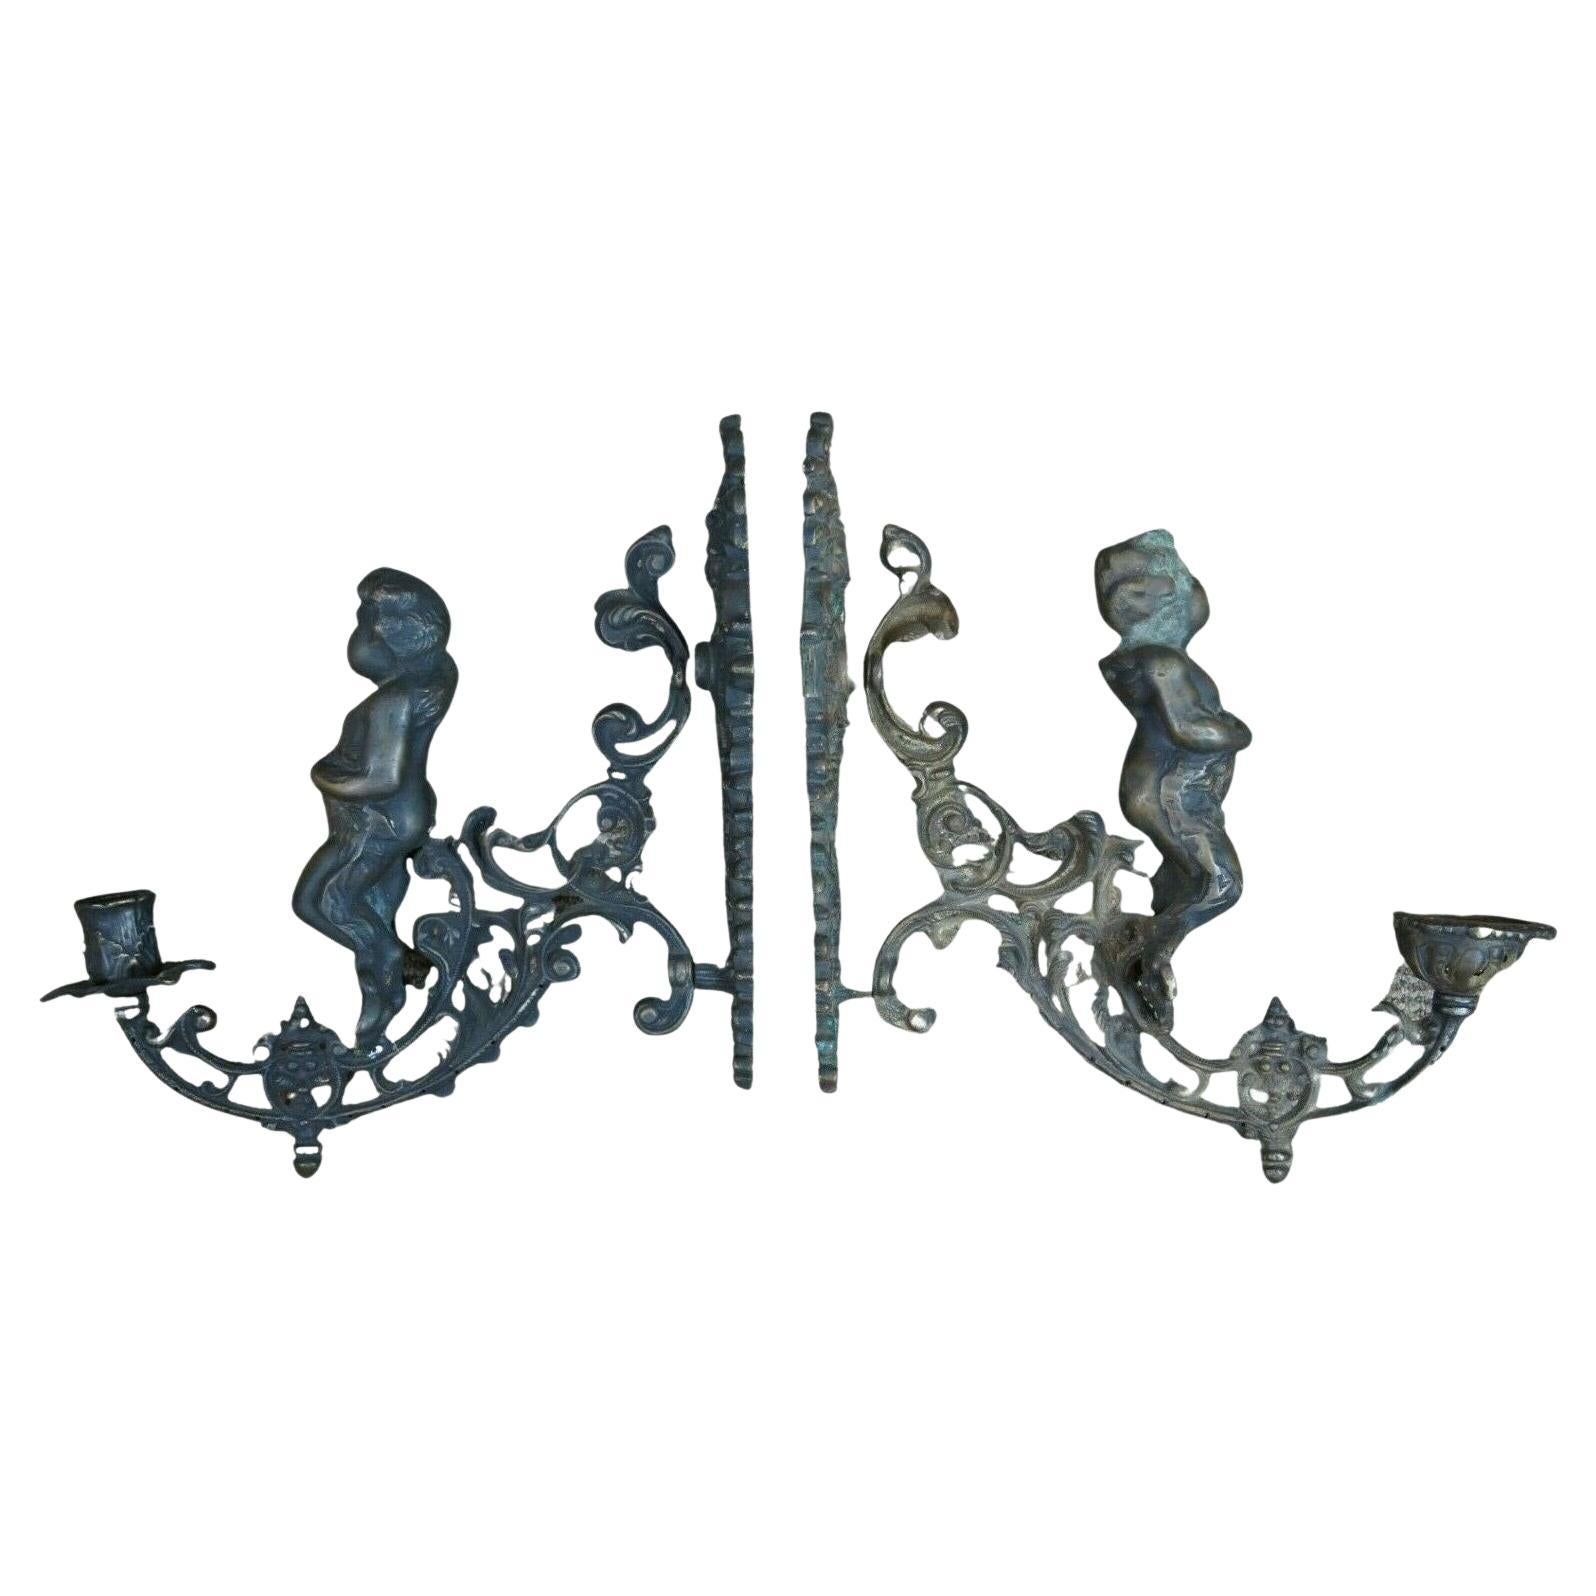 2 Antique Victorian Bronze Figural Wall Sconce Candle Holders Candelabras Cherub